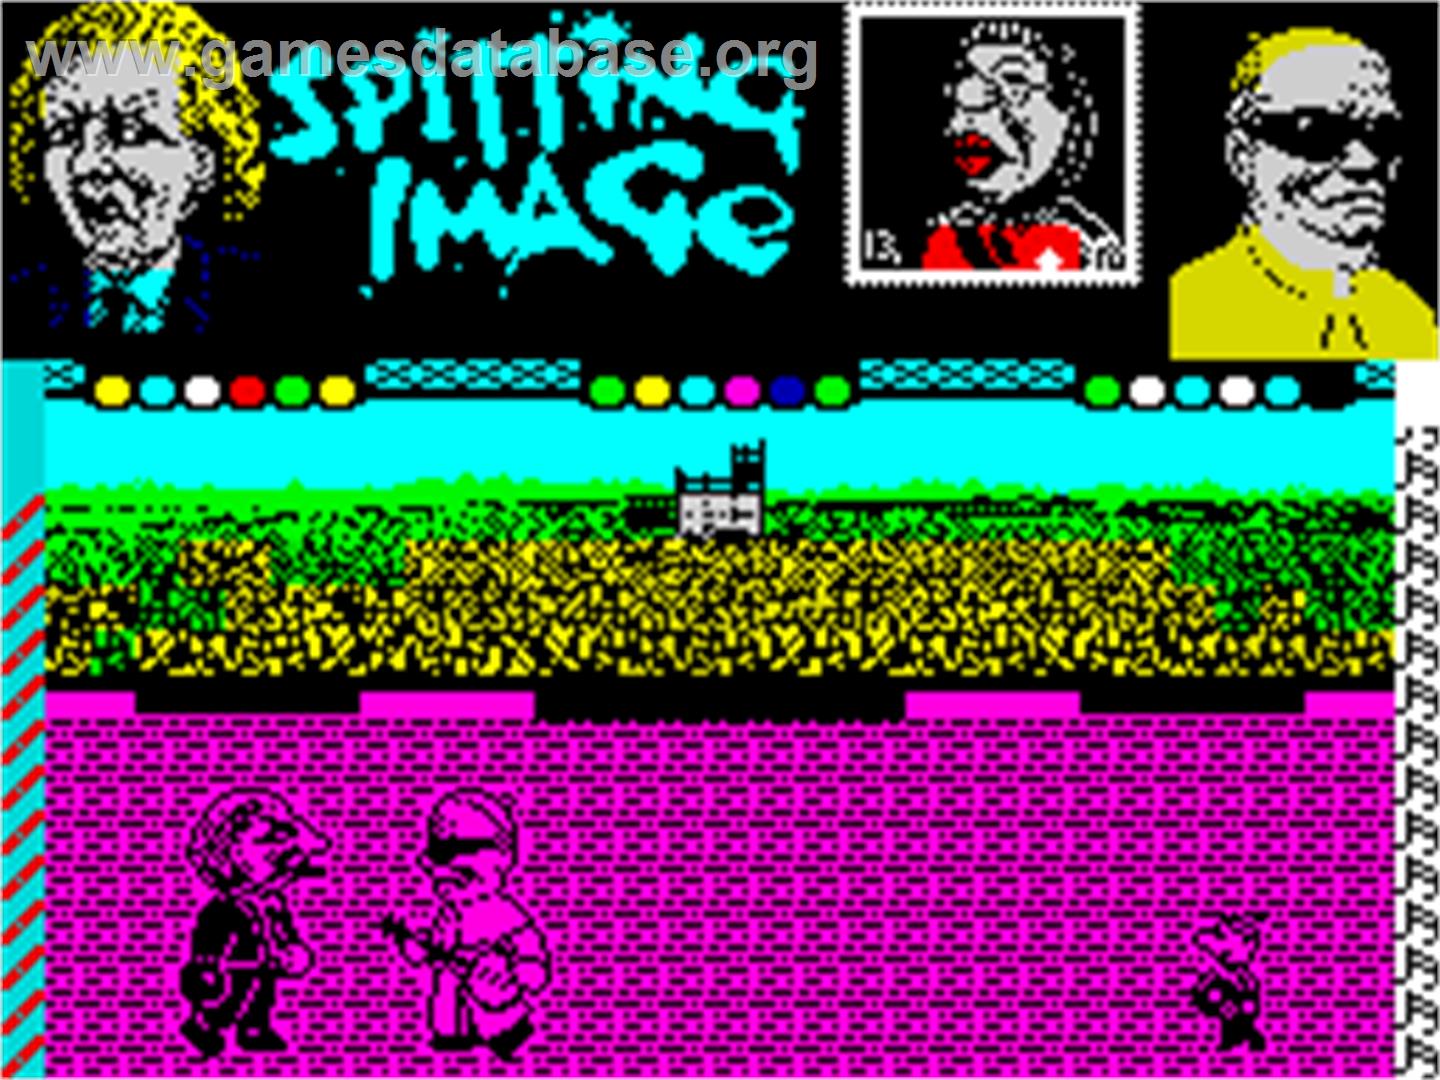 Sporting Triangles - Sinclair ZX Spectrum - Artwork - In Game